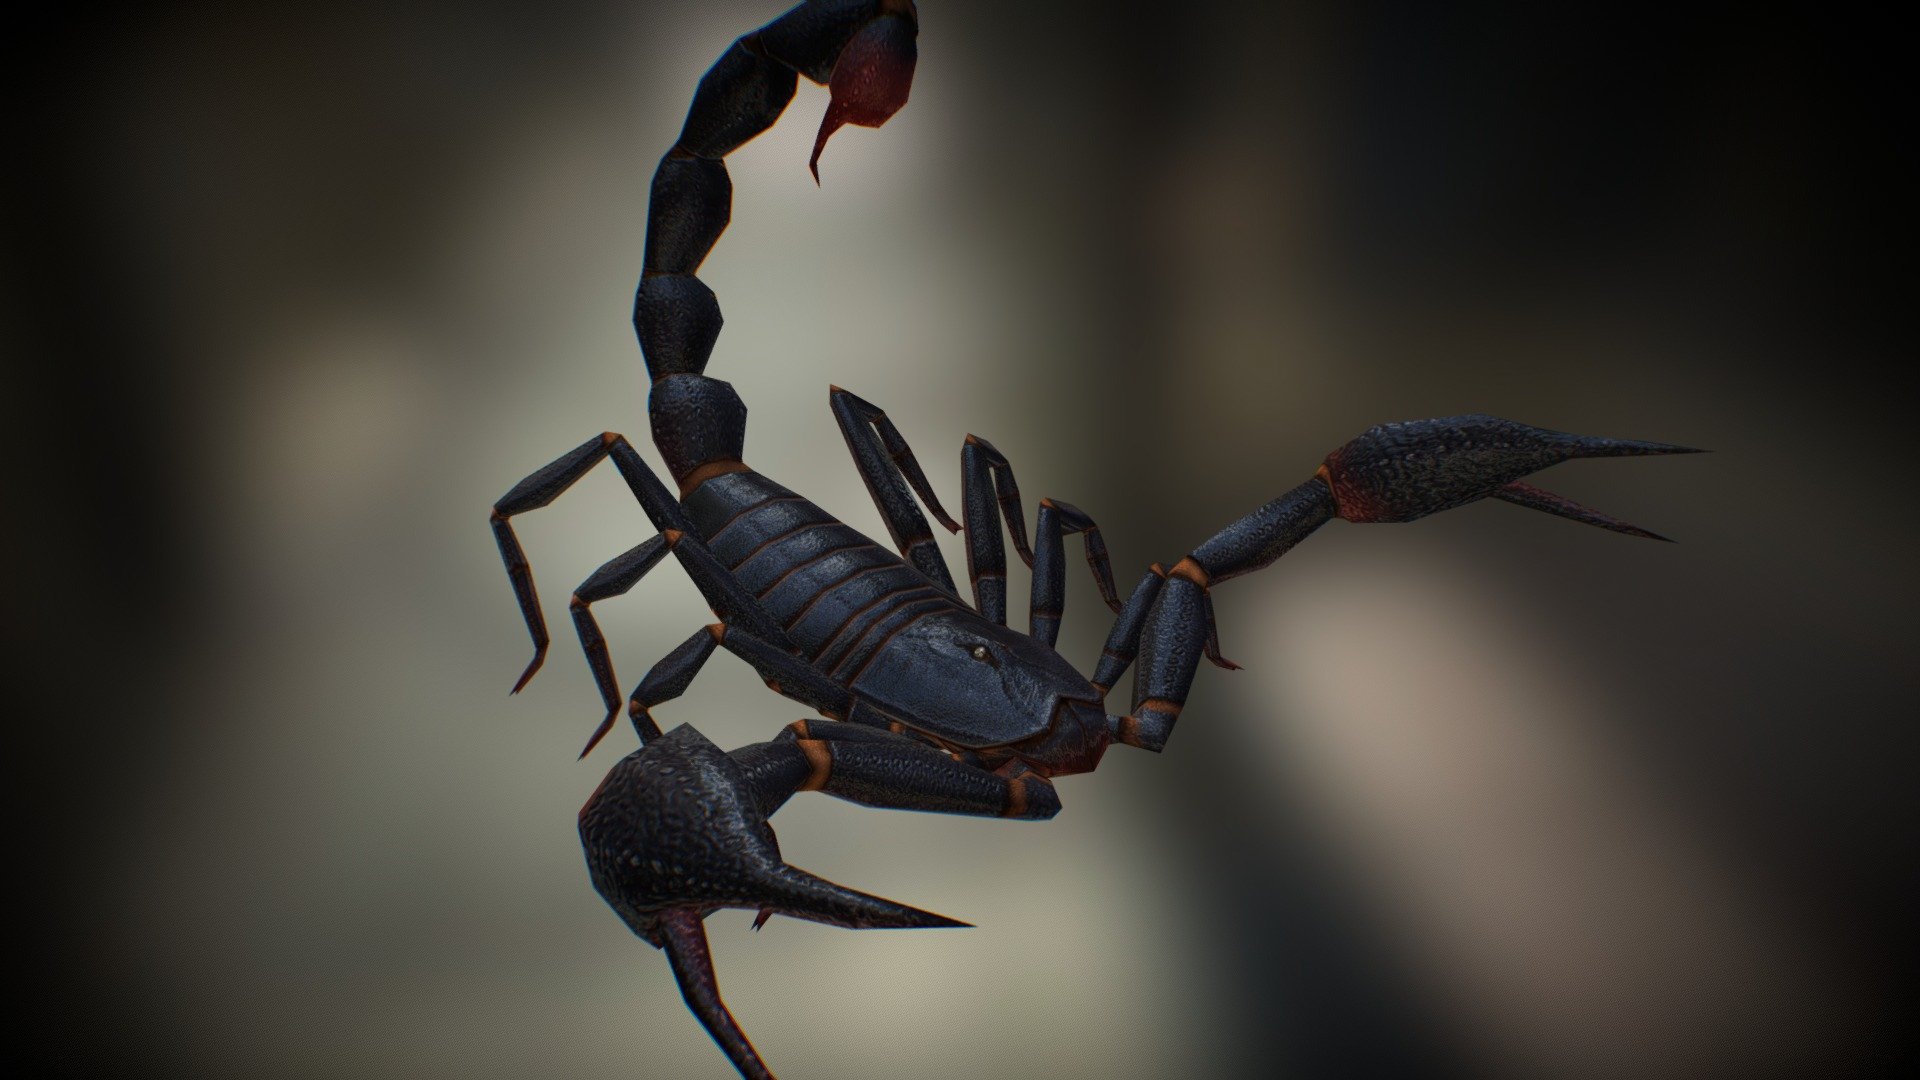 MODEL: (Arachnid_Scorpion.fbx)
 • SPEC = 1714 polygons, 865 vertices
 • RIG = 60 Joints with IK
 • DIMENSIONS = 2.16 cm x 1.98 cm

TEXTURE: (Arachnid_Scorpion##_*.png)
 • TYPE = Diffuse(D), Specular(S), Gloss(G), Normal(N)
 • FORMAT = .png (1024 x 1024 24 bits) - Scorpion 03, Emperor - 3D model by hinxlinx 3d model